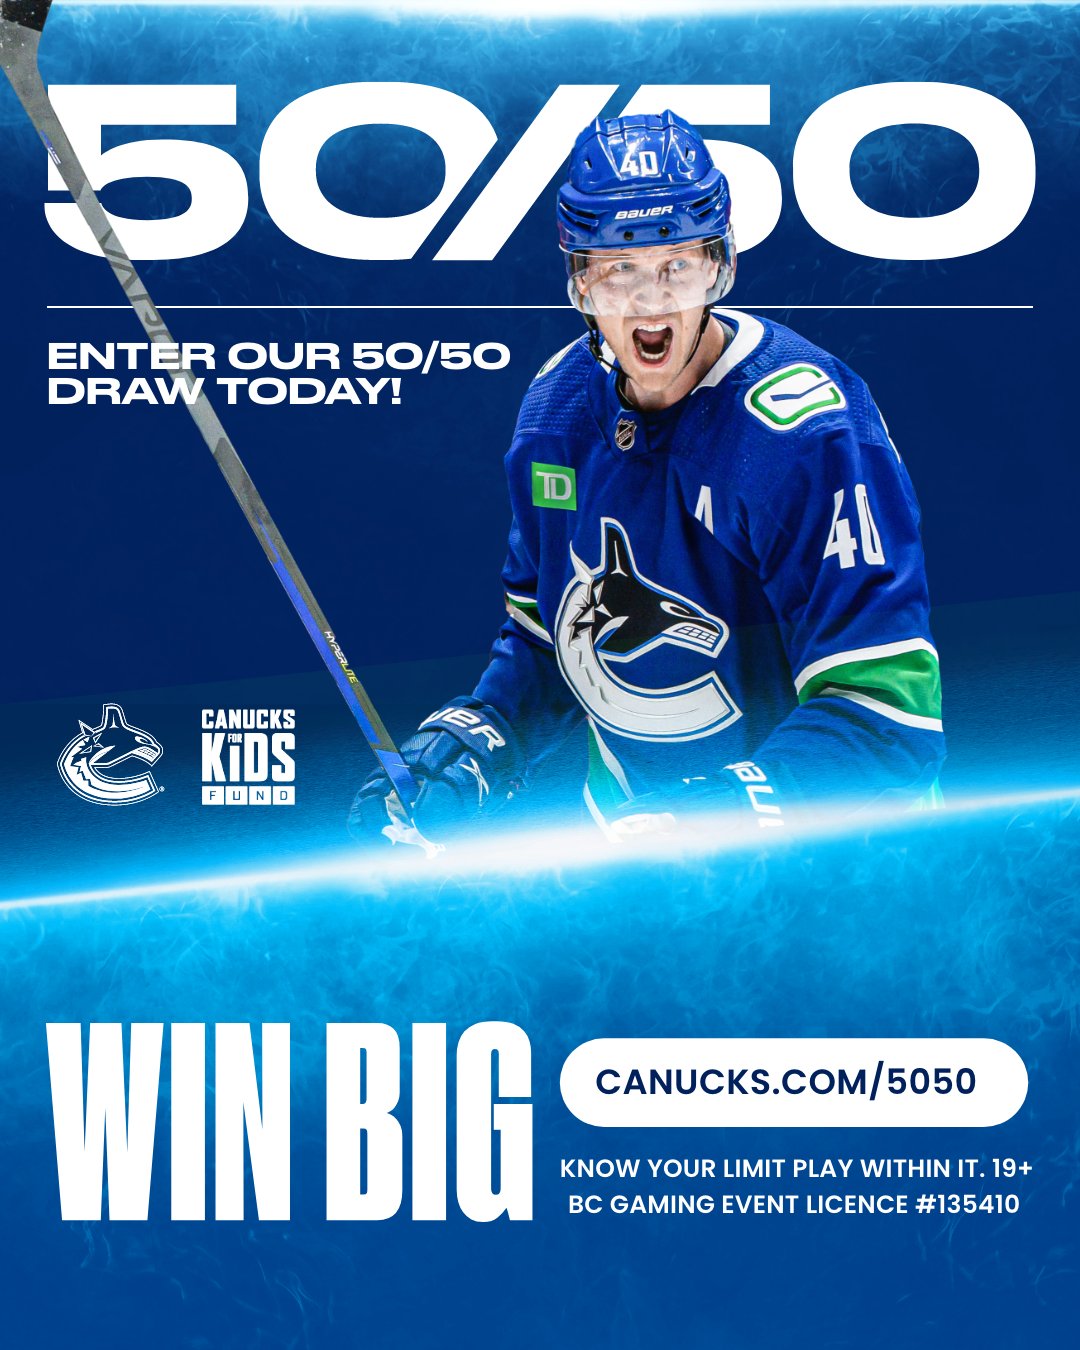 Vancouver Canucks on Twitter